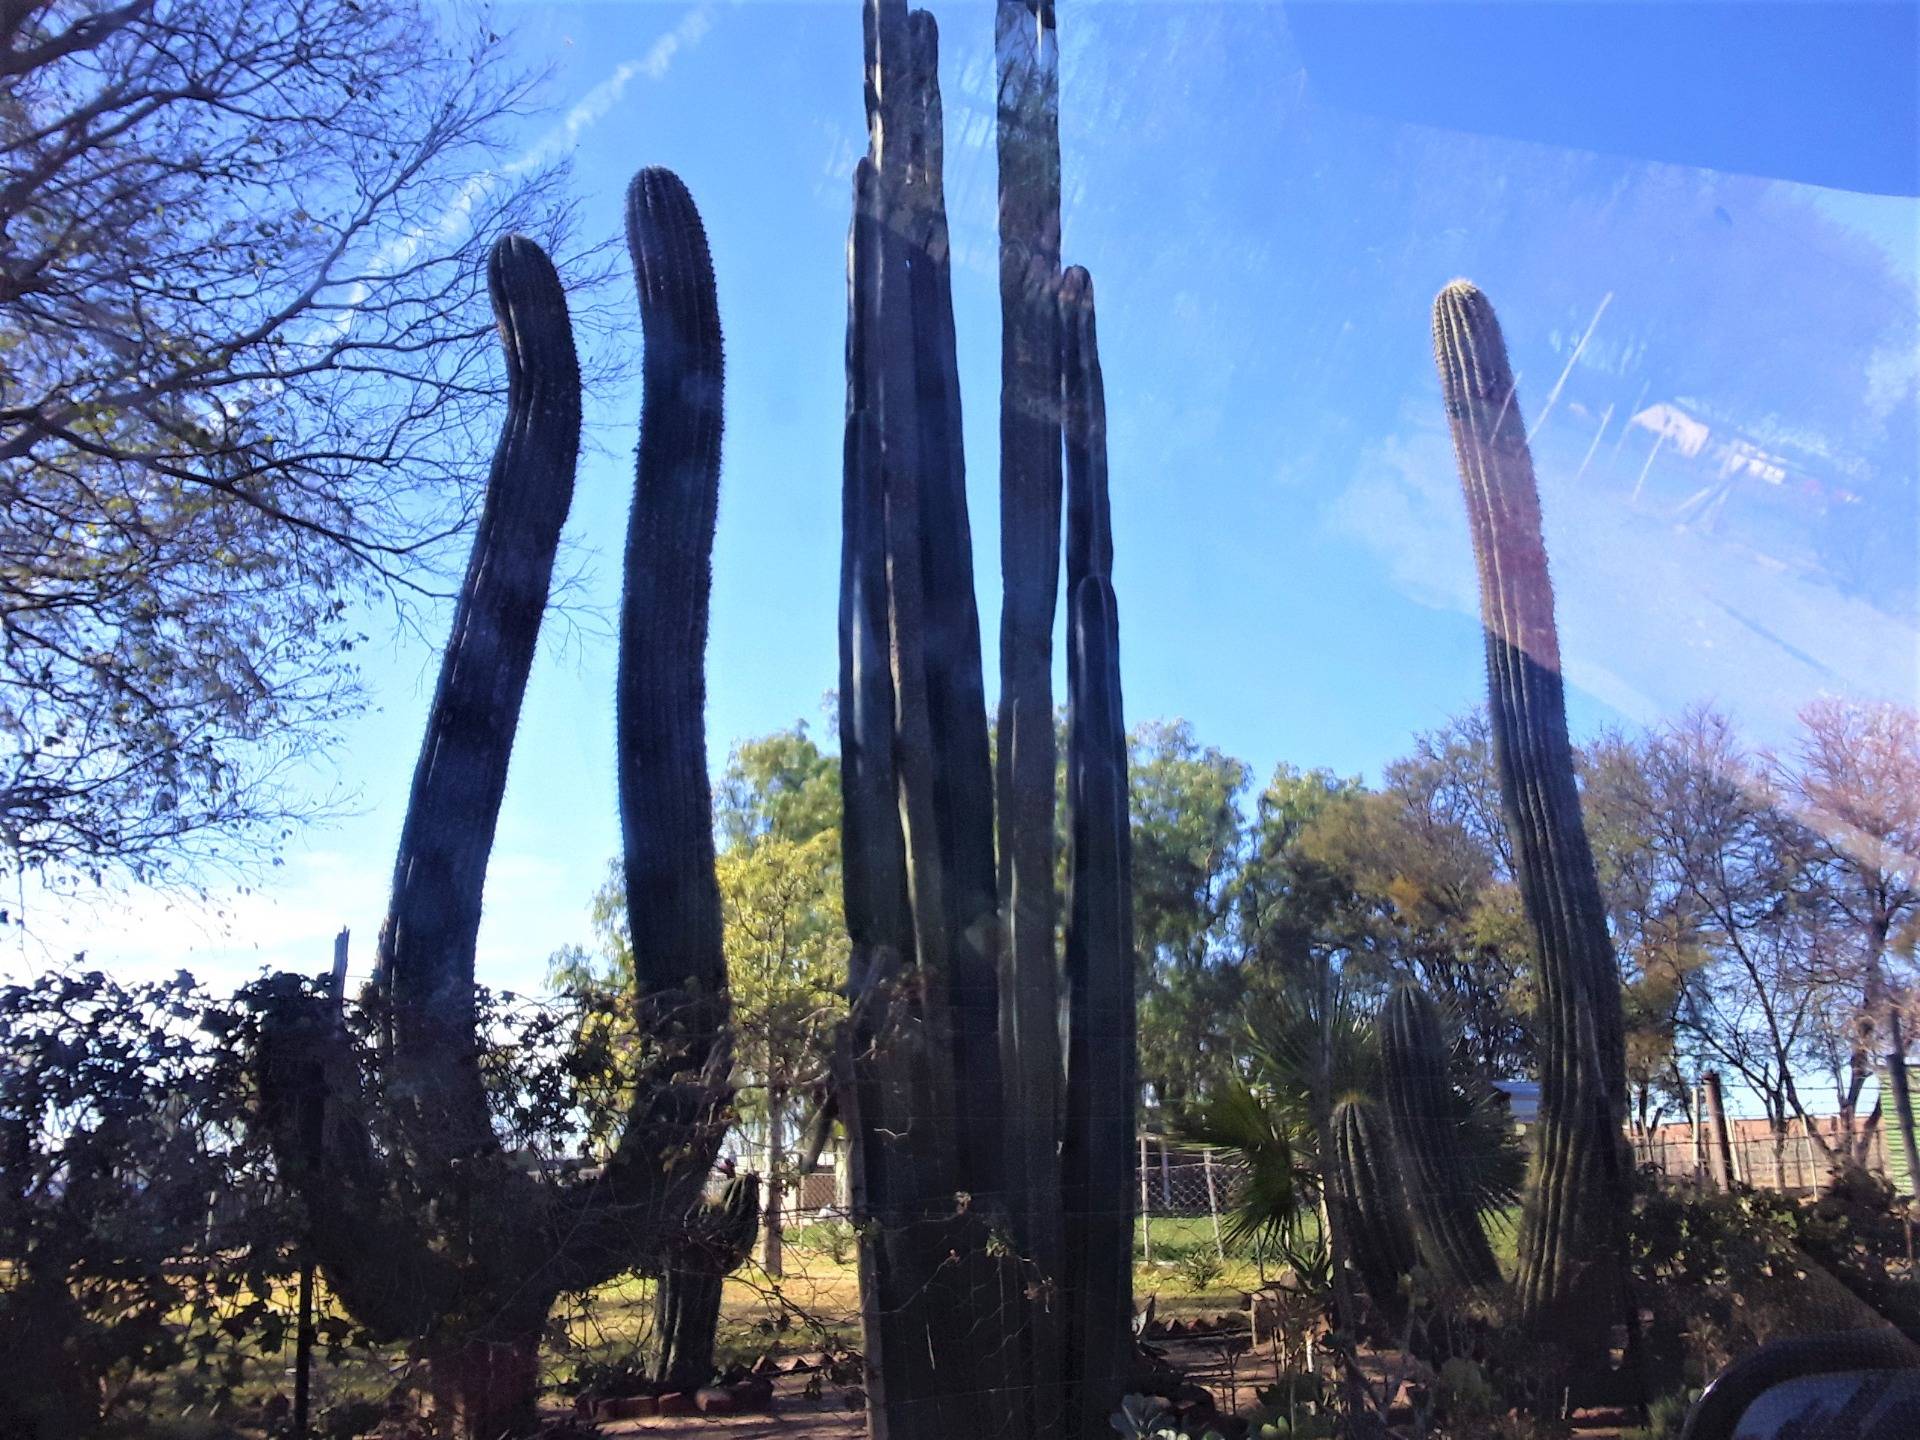 Some serious cactus in a well-maintained garden